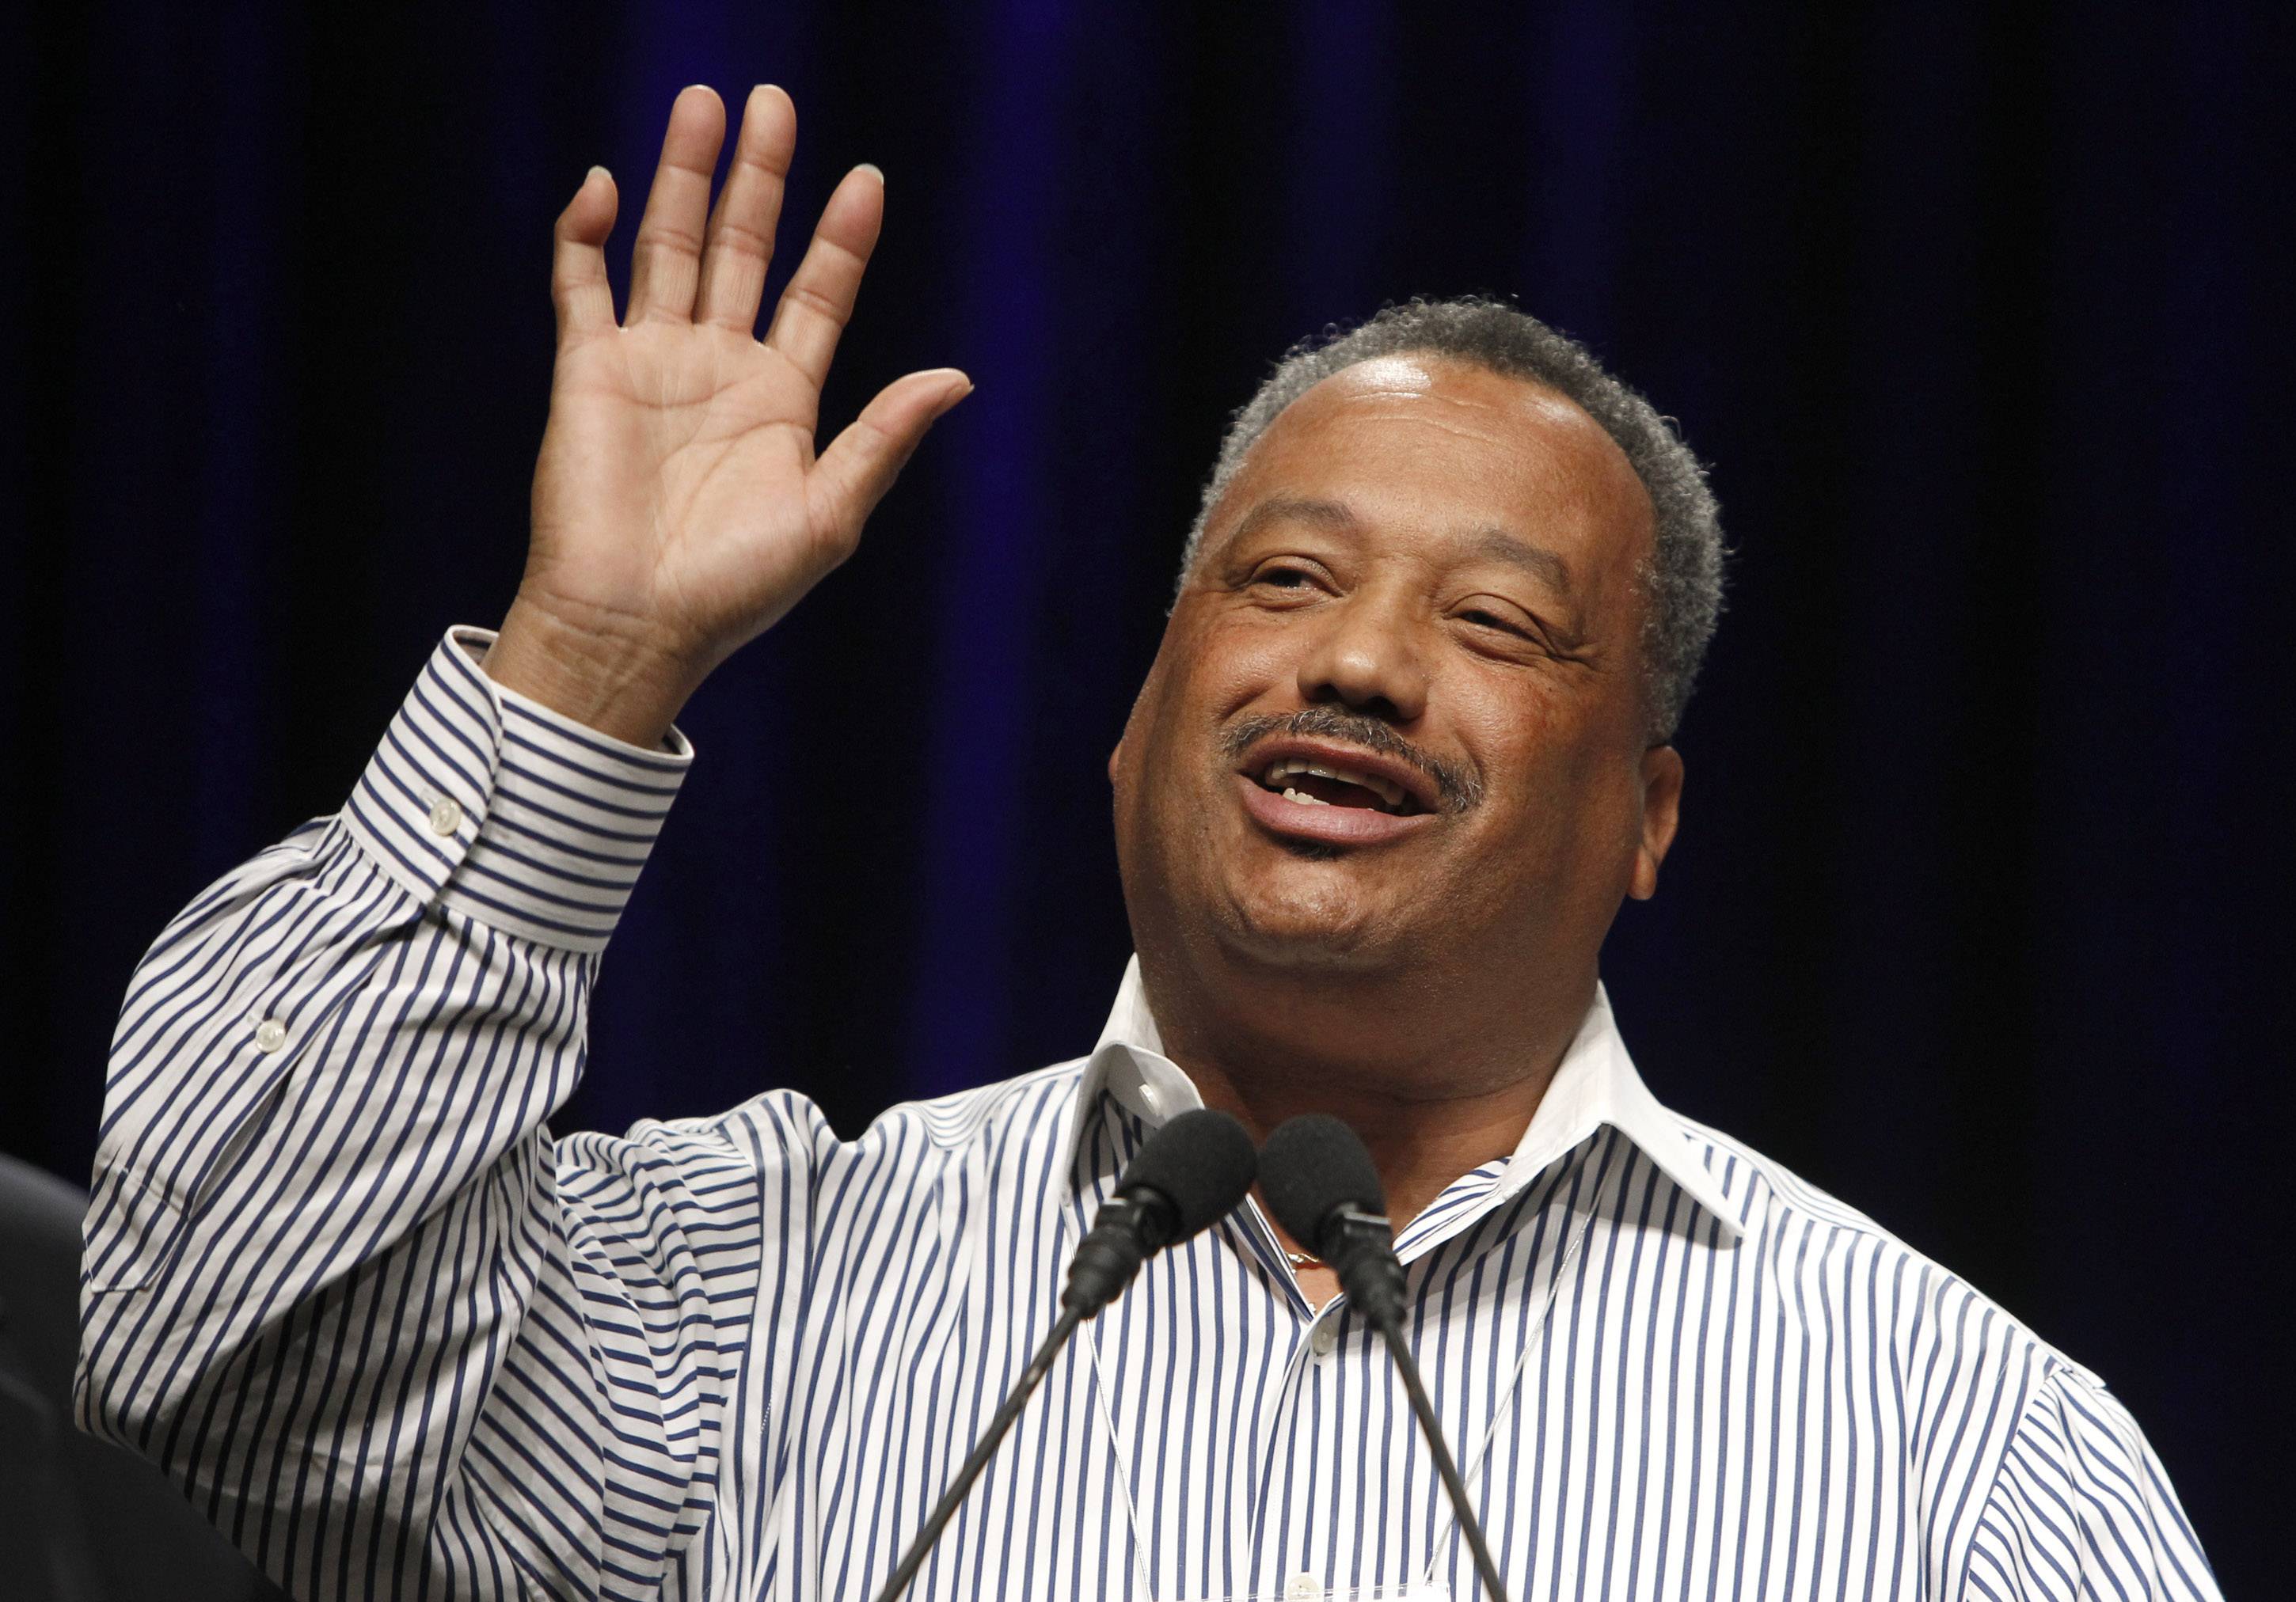 Southern Baptists Elect Black Pastor to No. 2 Spot - On Tuesday, the Rev. Fred Luter of Franklin Avenue Baptist Church in New Orleans became the first Black pastor to be elected to a position within the Southern Baptist Convention. He was elected vice president. Luter’s election comes as the Southern Baptist Convention is making a push for greater participation among non-white members.(Photo: AP Photo/Ross D. Franklin)